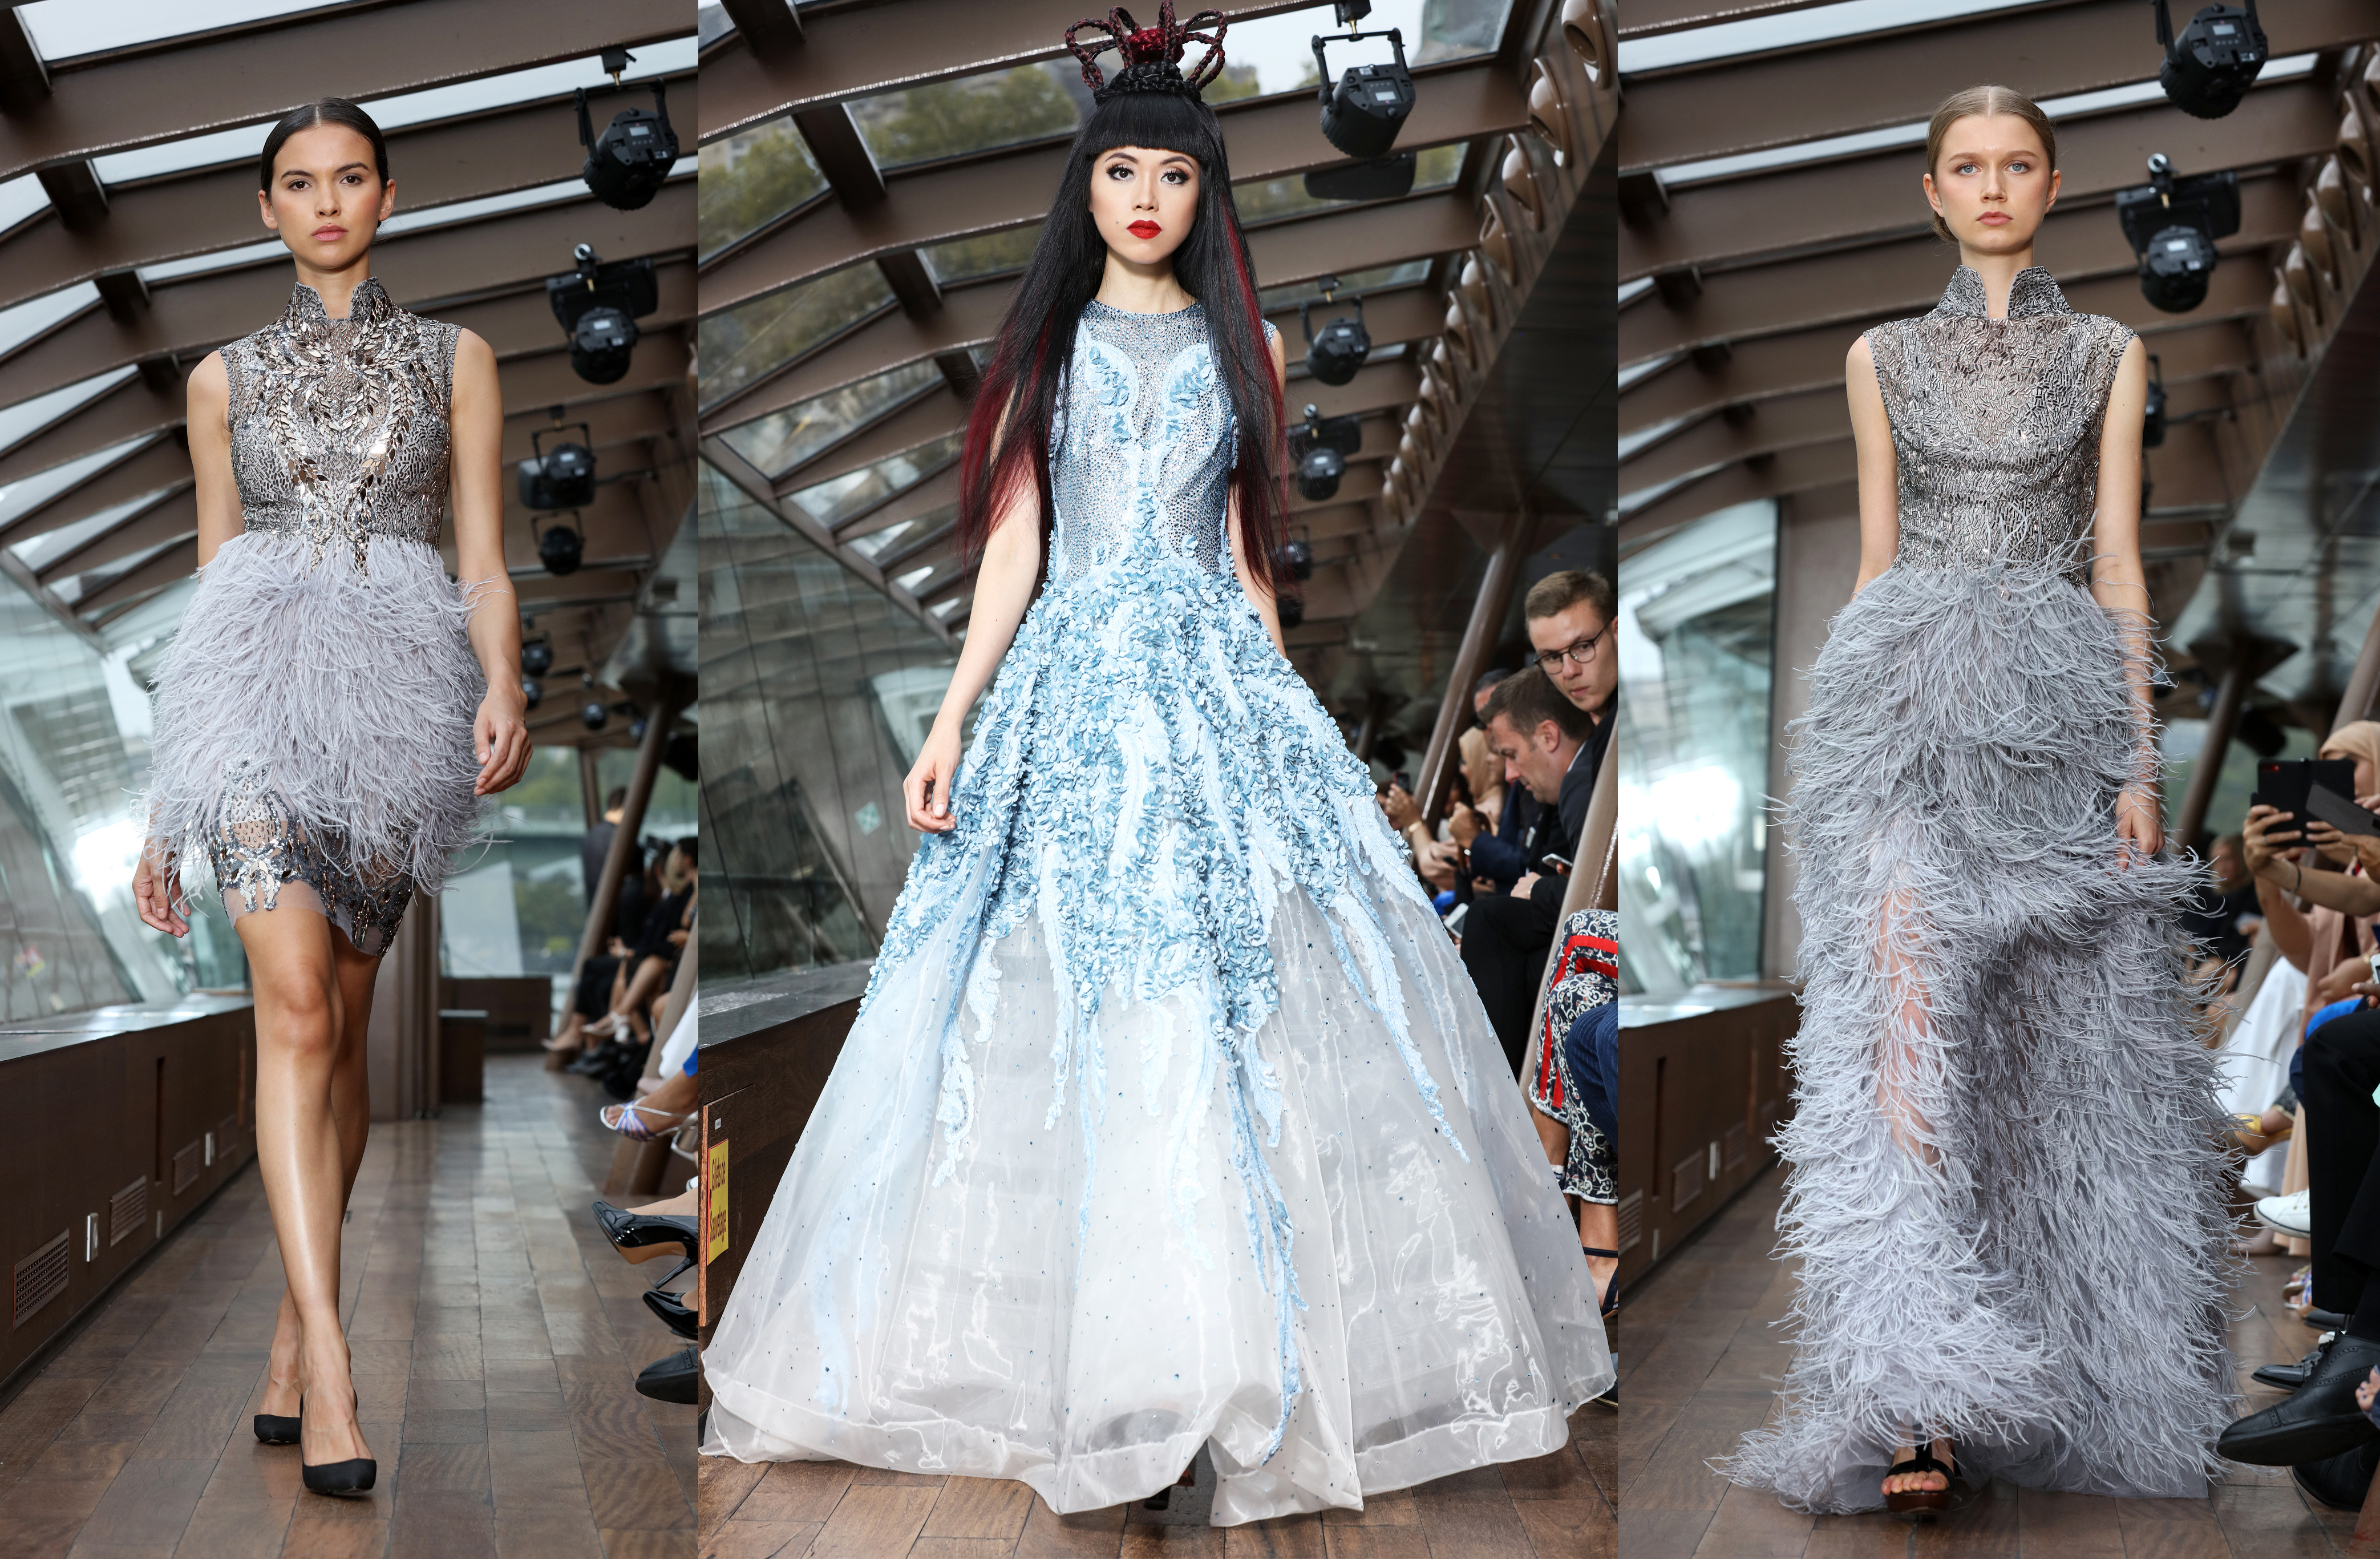 Atelier Zuhra at Jessica Minh Anh's _Catwalk on Water_ 2